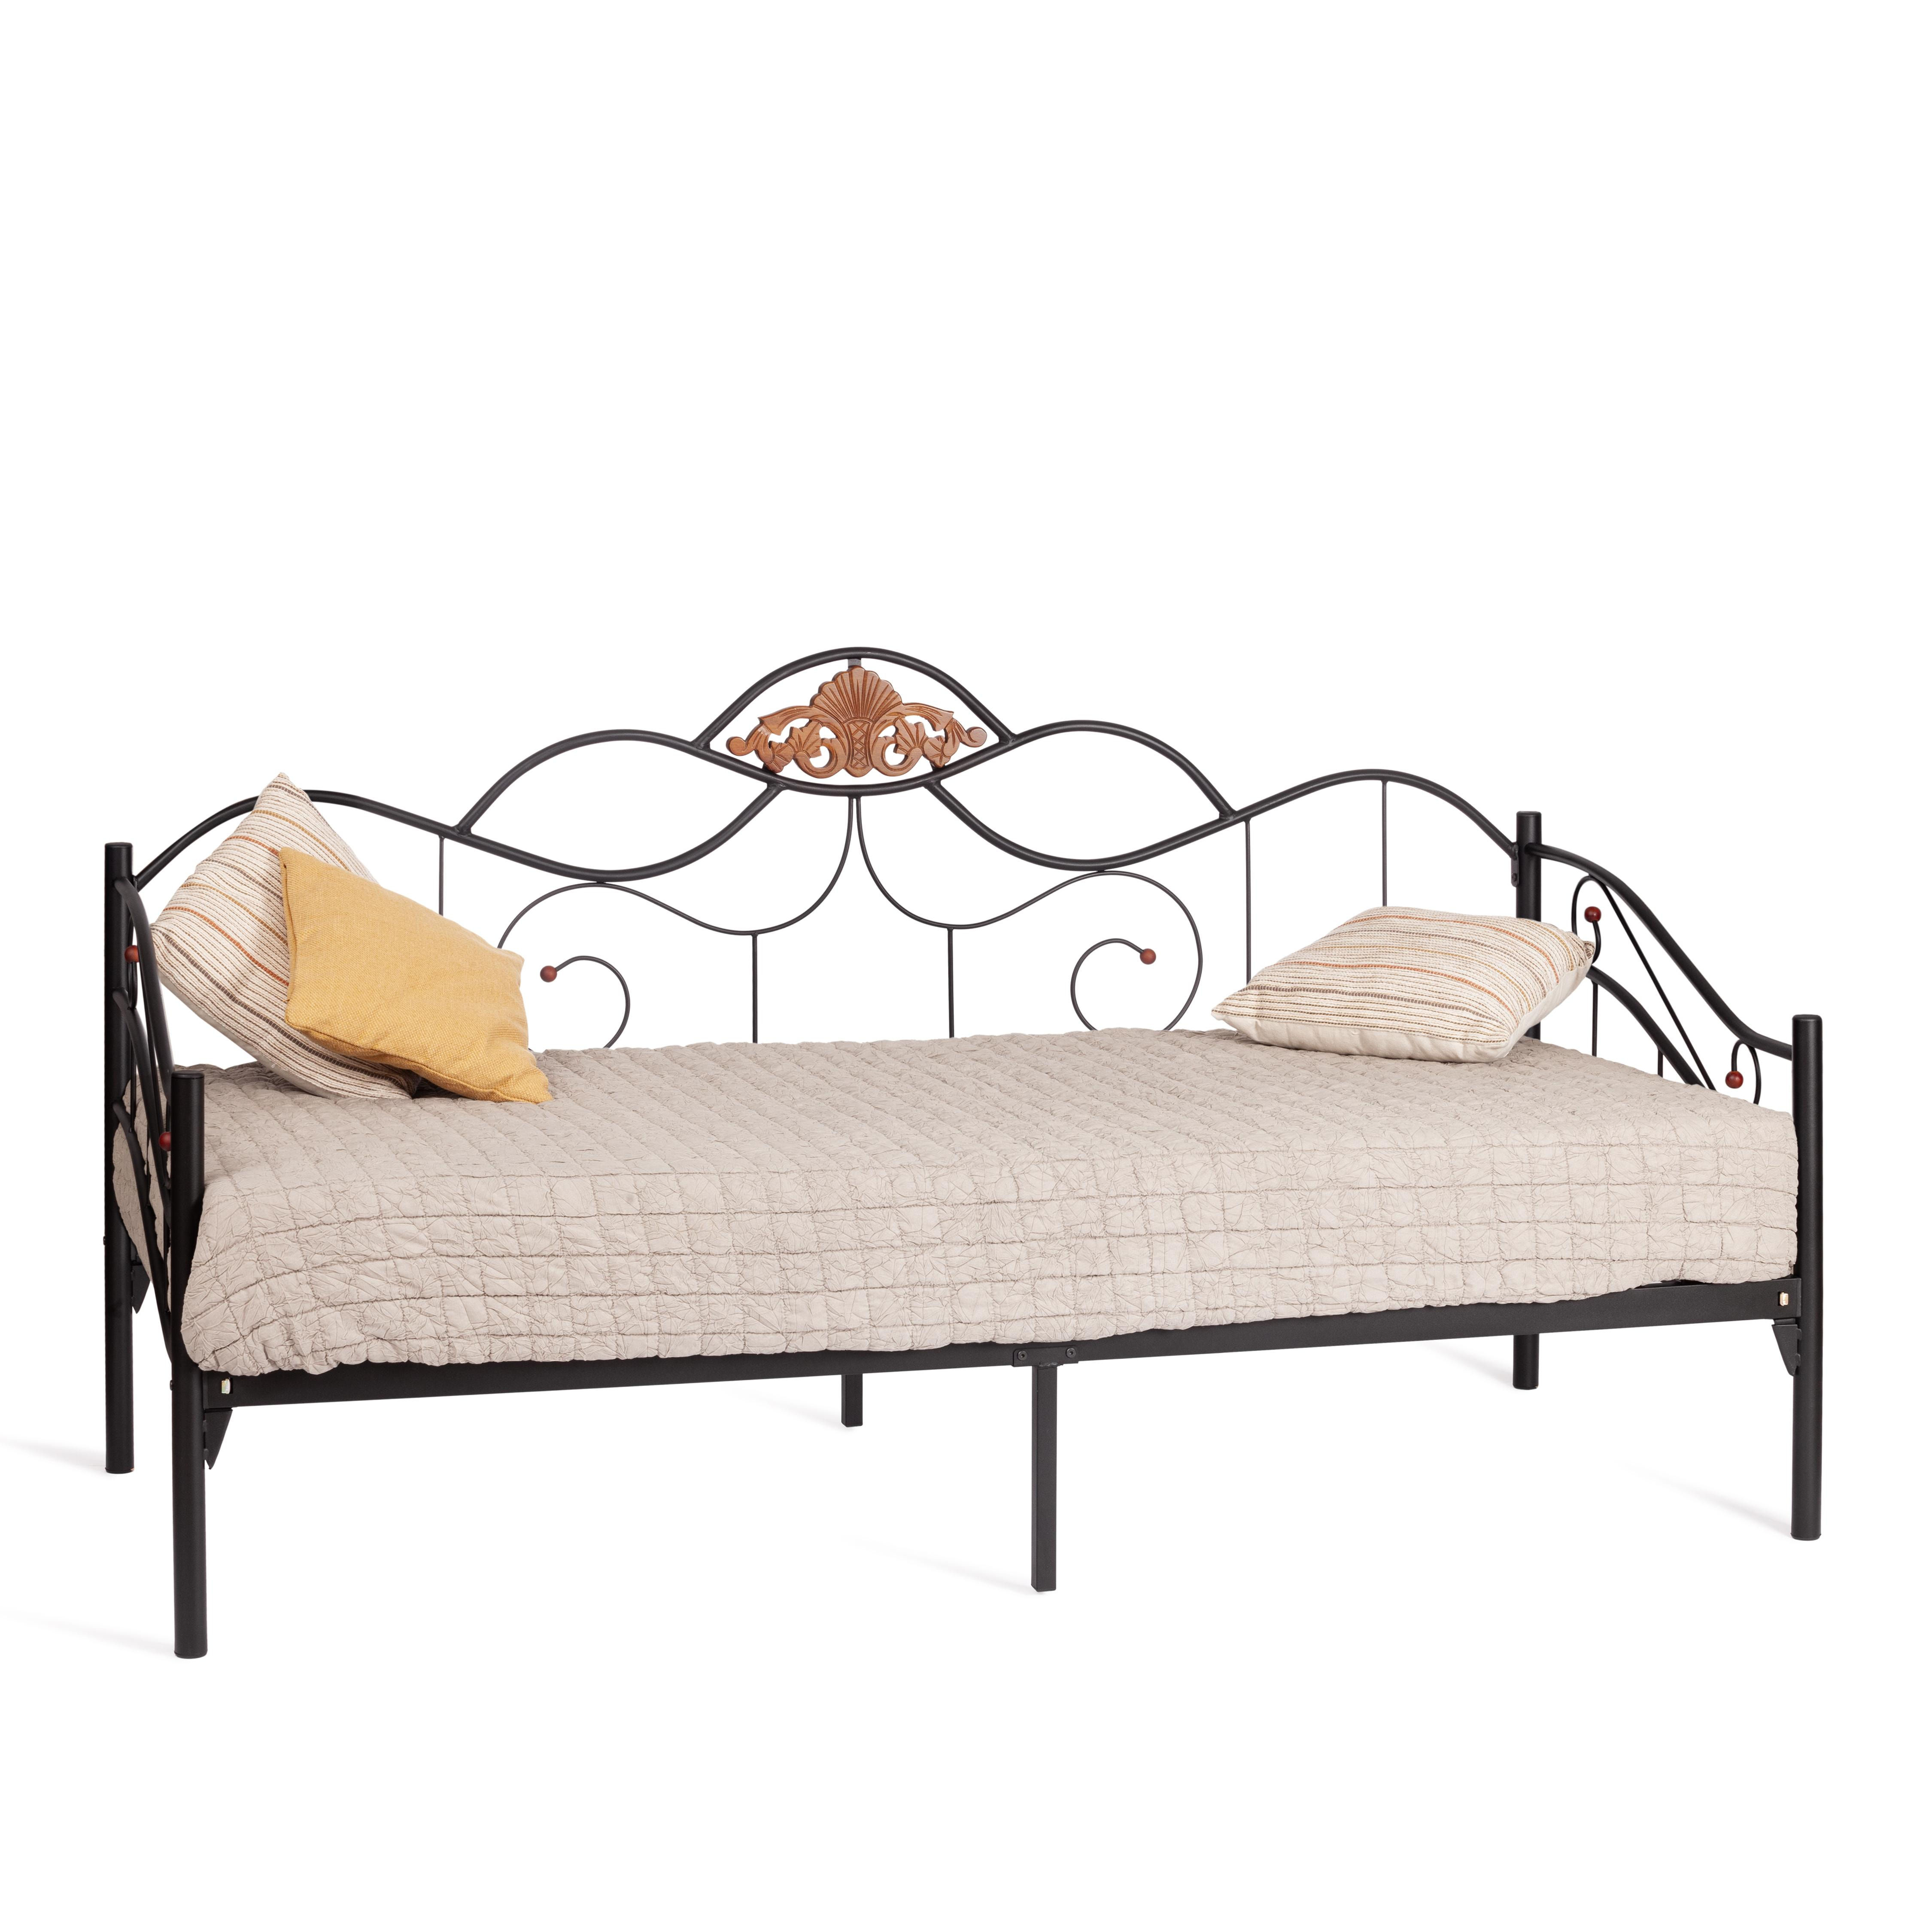  TetChair Federica AT-881 Day bed  , 